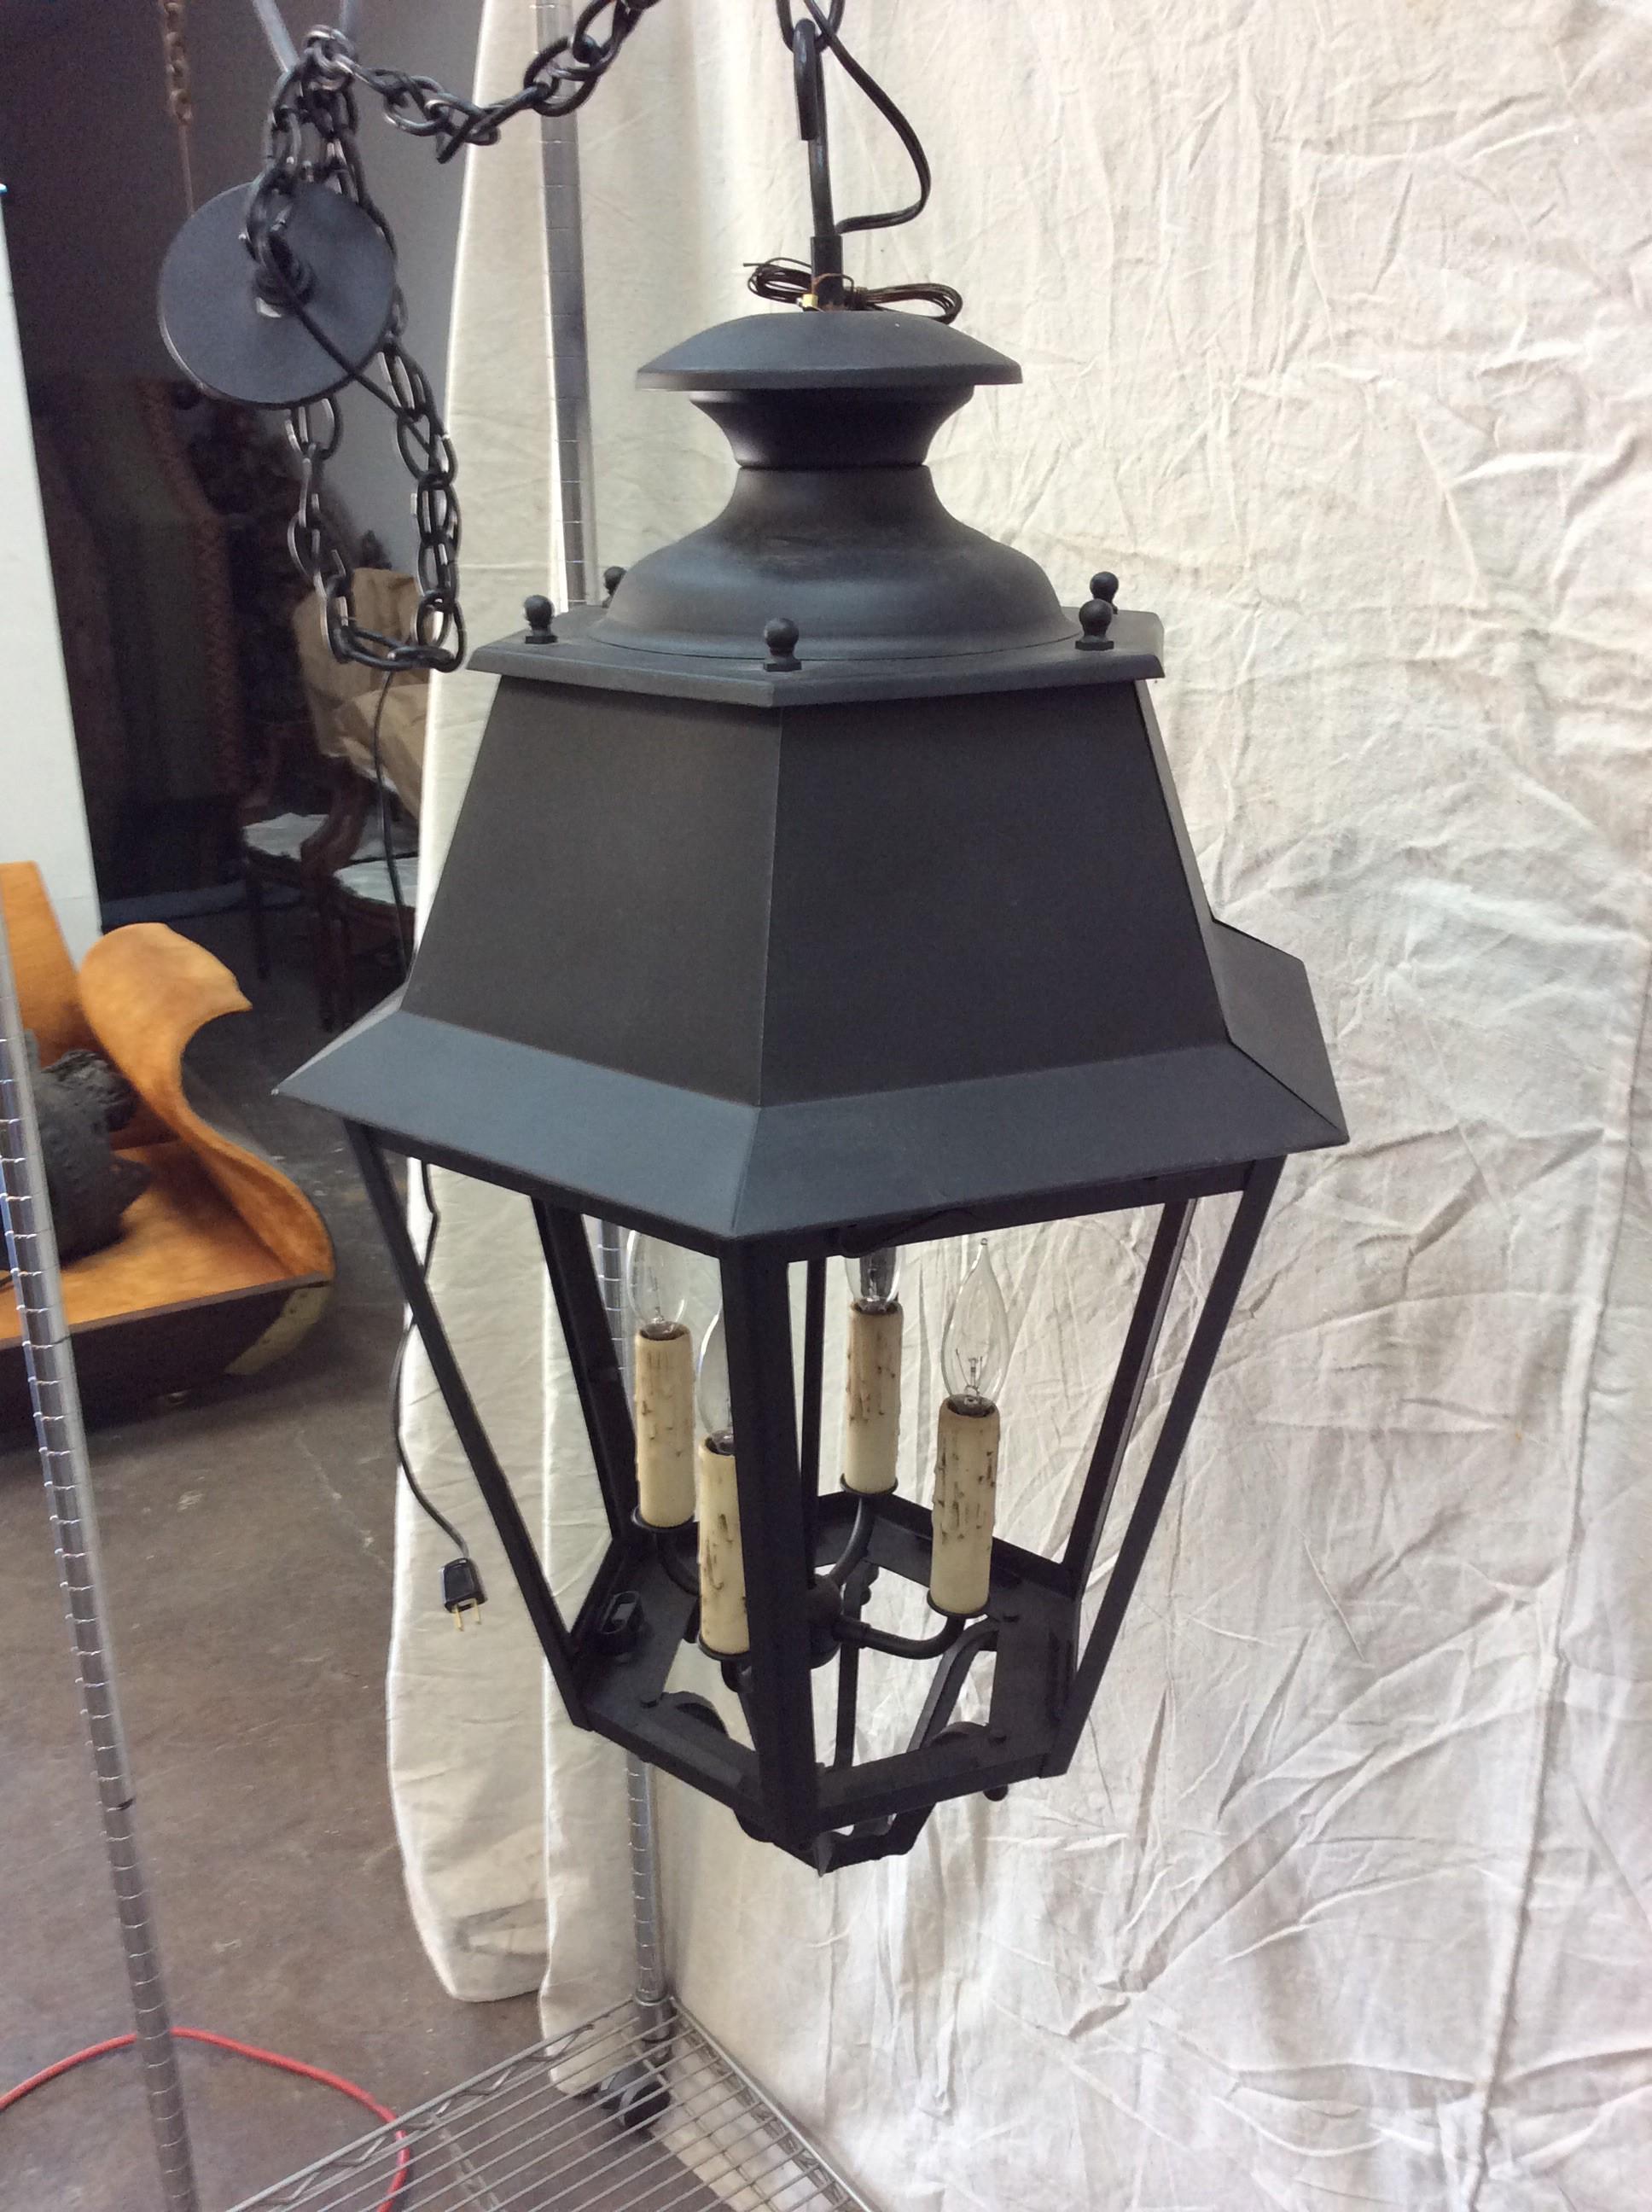 Found in the South of France, this 20th century Hanging Lantern was handcrafted in France and retains it's original finish and metal work. The wiring has been updated and features a four candelabra light cluster attached to a swivel rod. Hexagonal